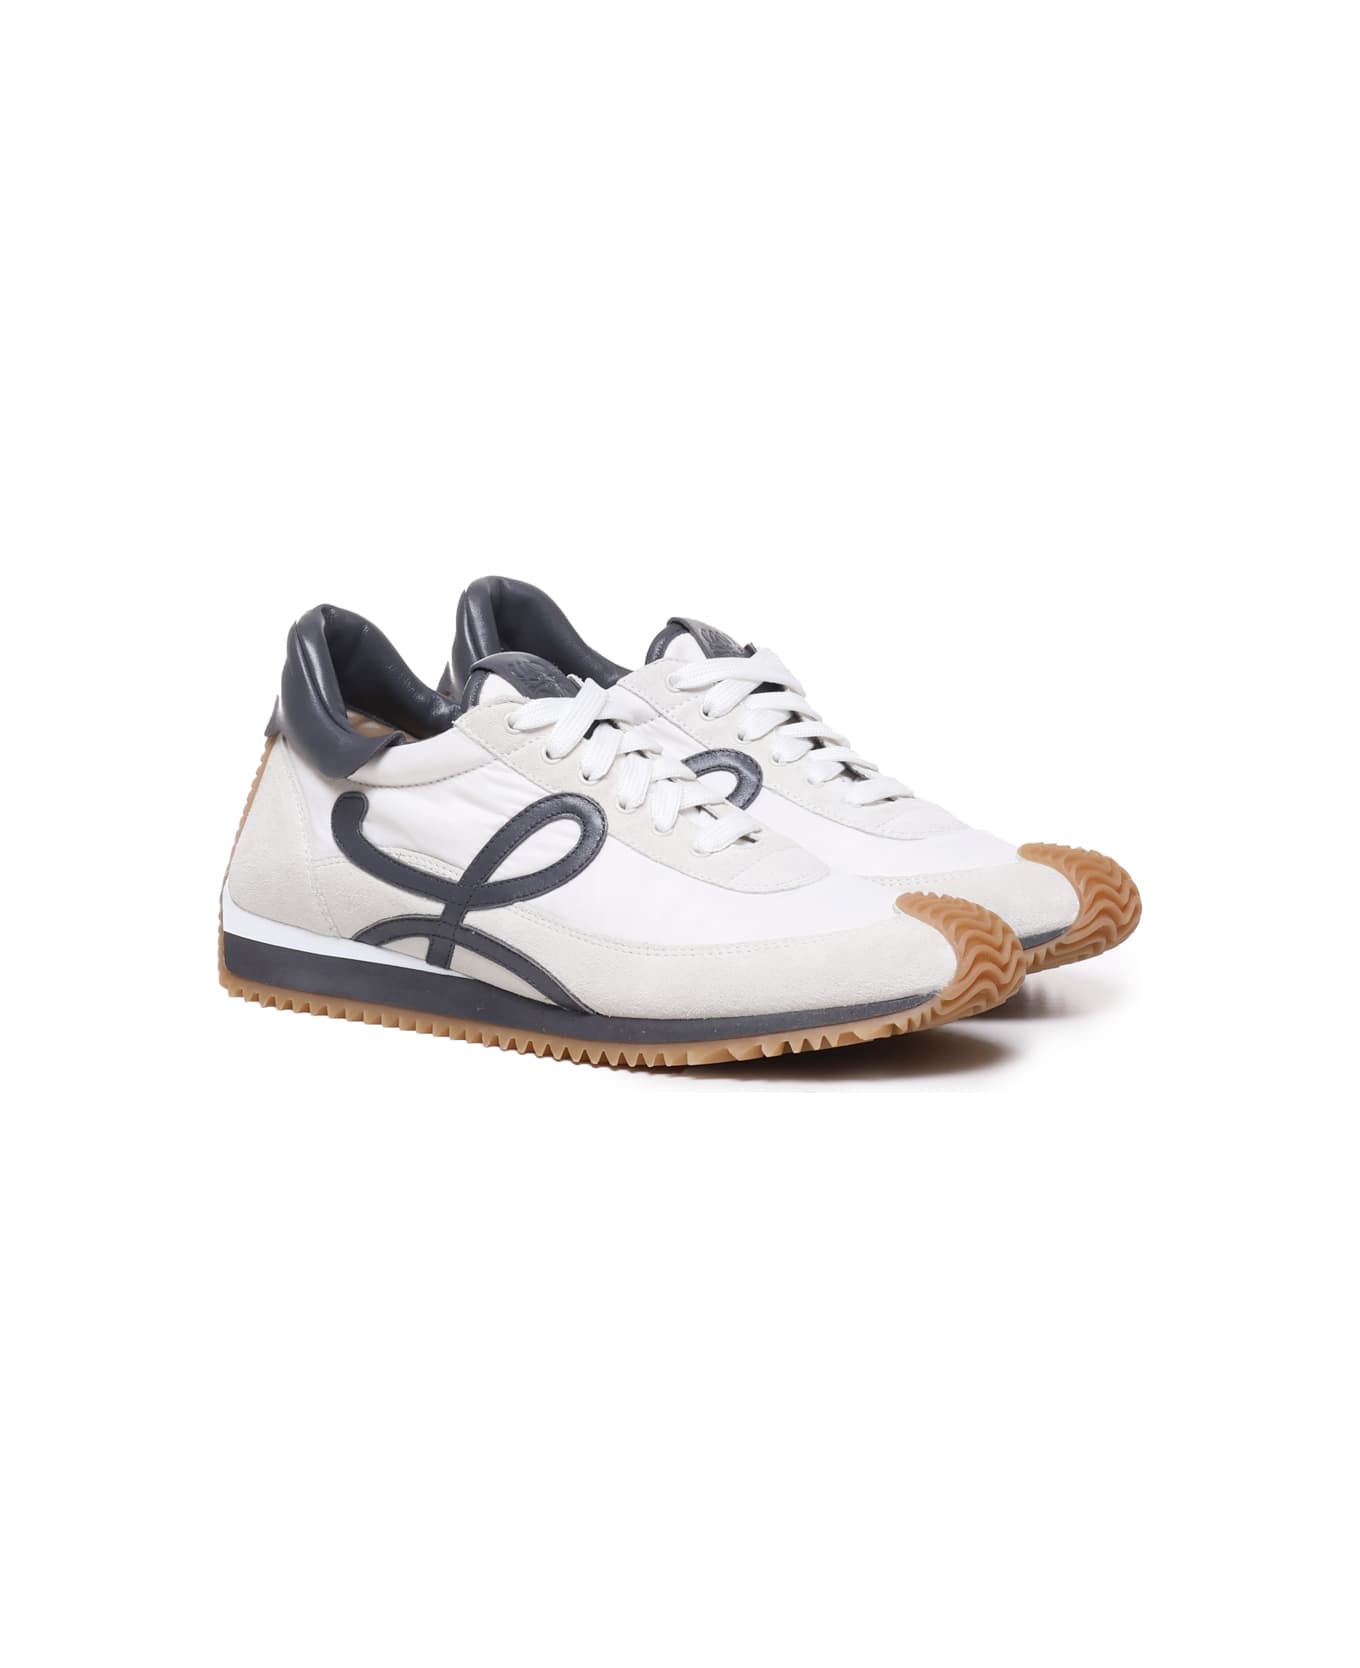 Loewe Flow Runner In Nylon And Suede - Blue anthracite/white